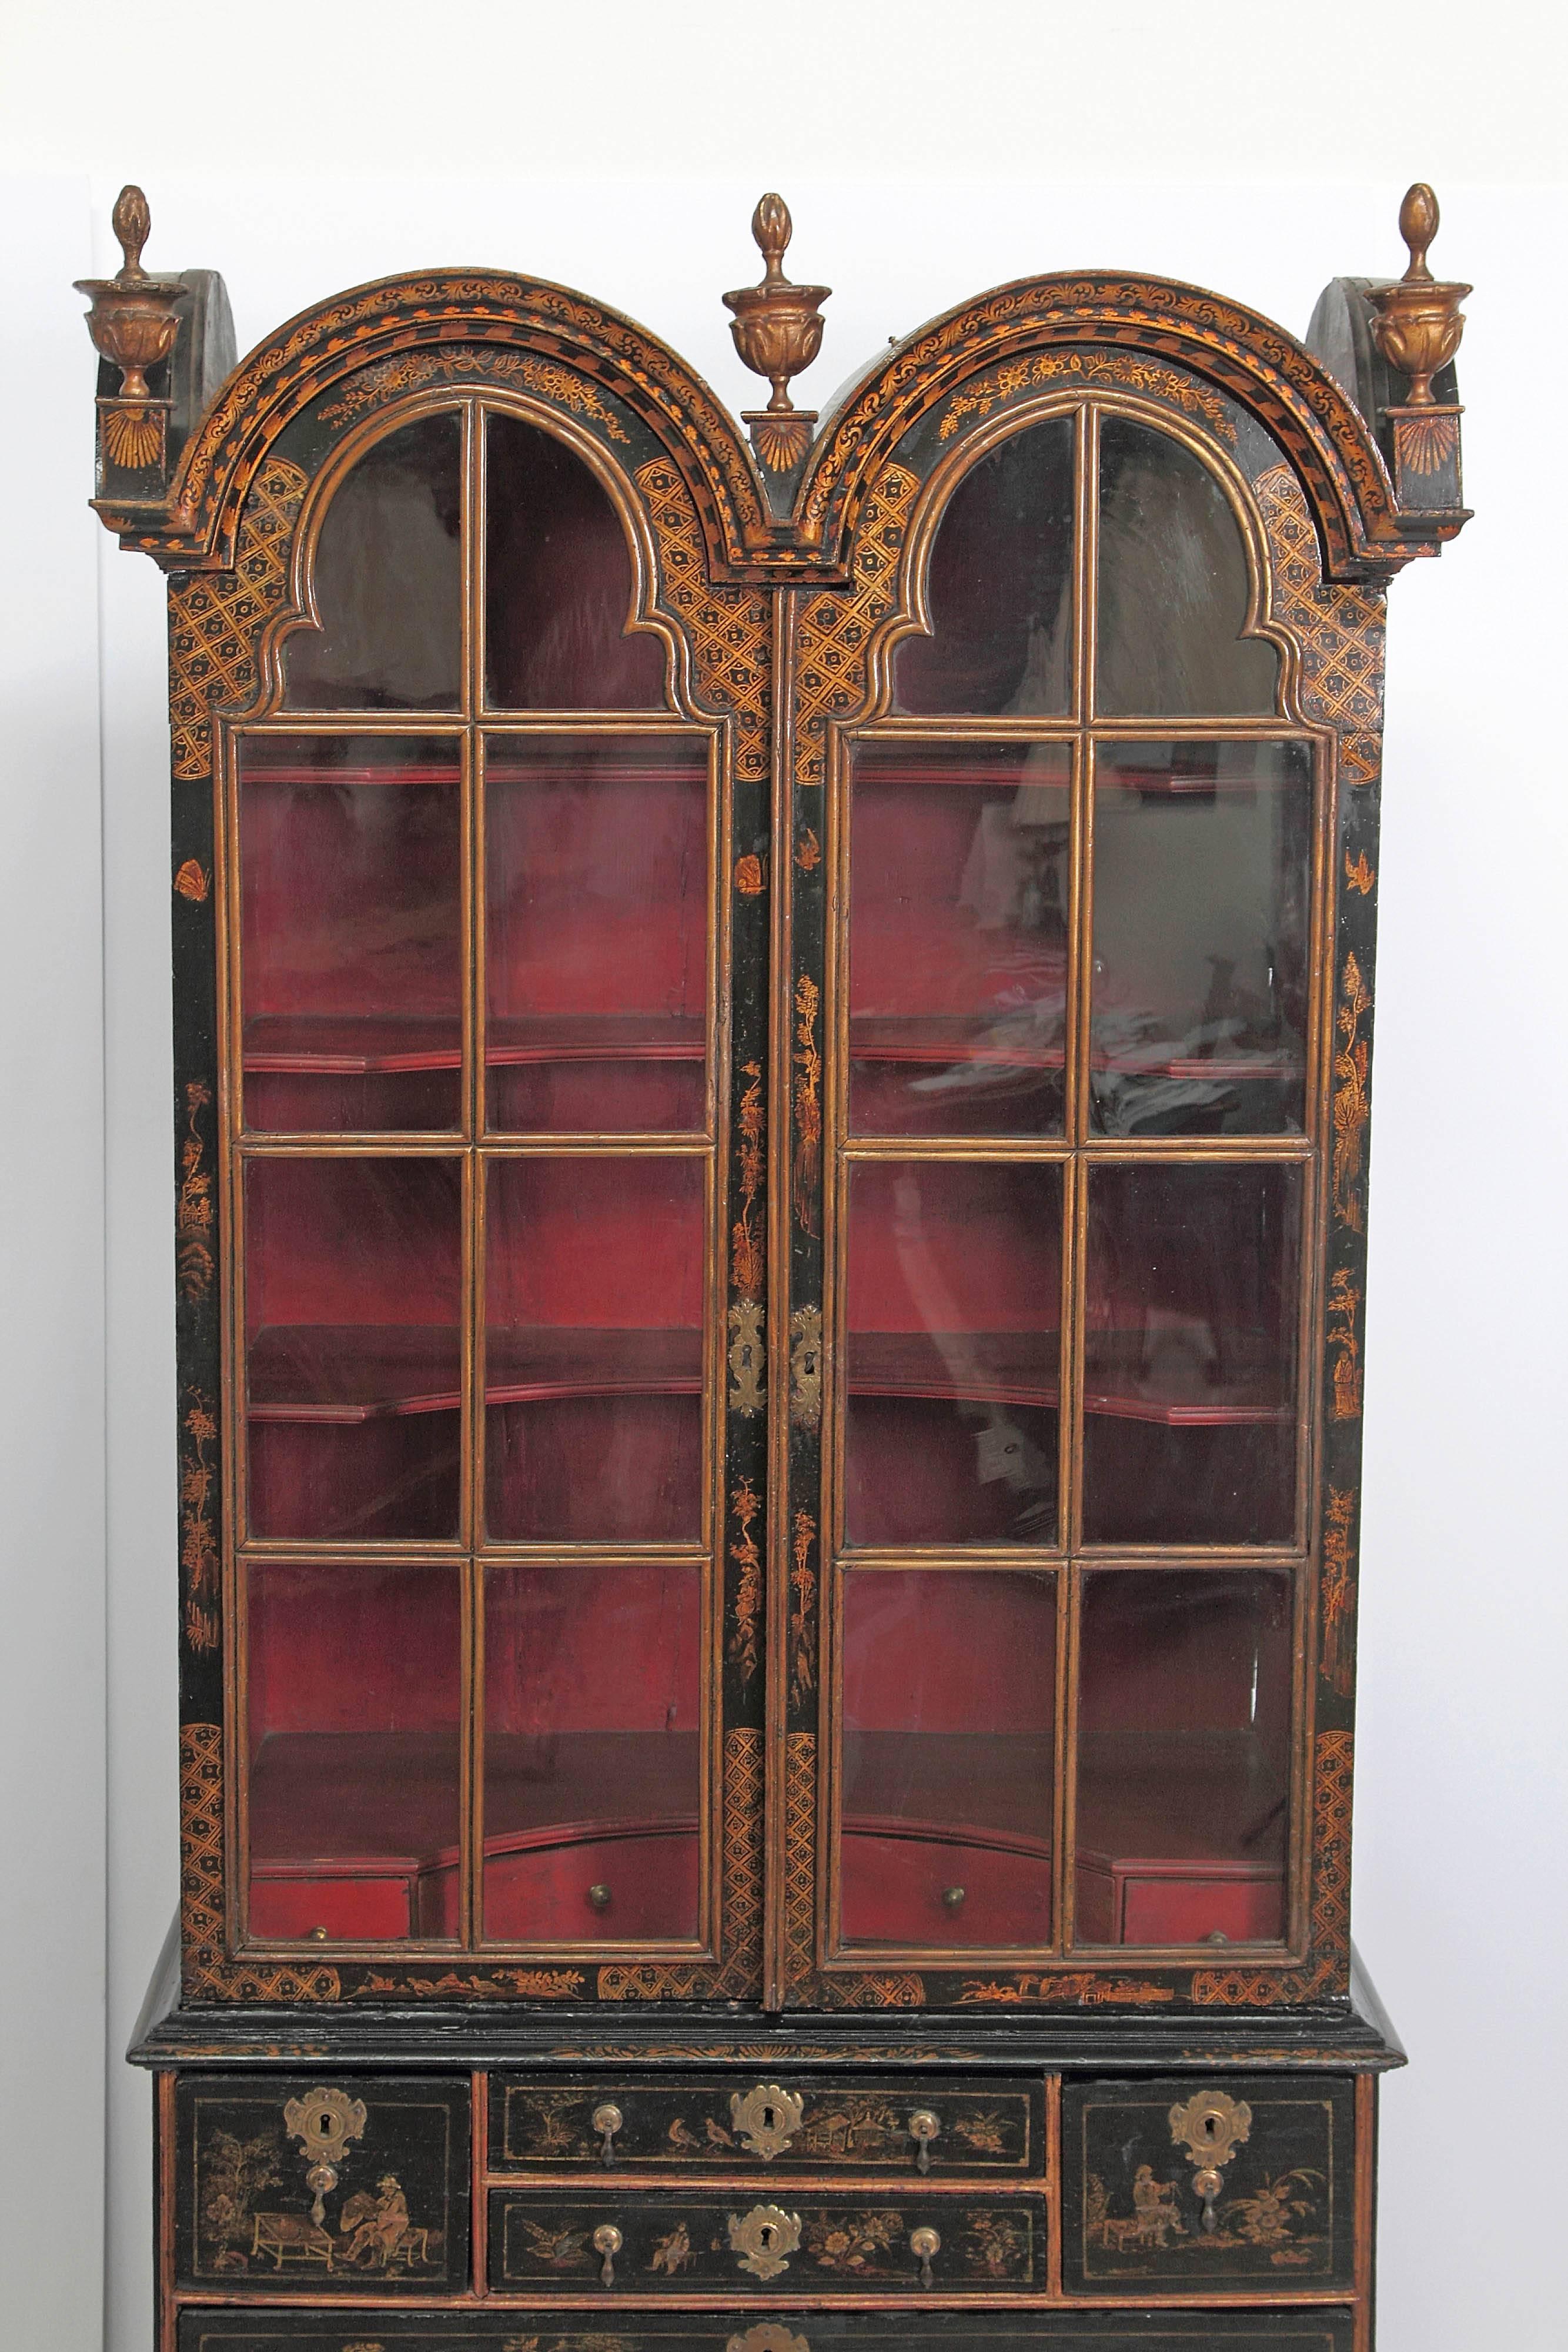 A period Queen Anne cabinet with glass paned doors over a chest of drawers, the whole rests on bun feet, double-bonnet top with three flaming urn finials, the upper cabinet interior is red and fitted with shaped / concave shelves and a series of